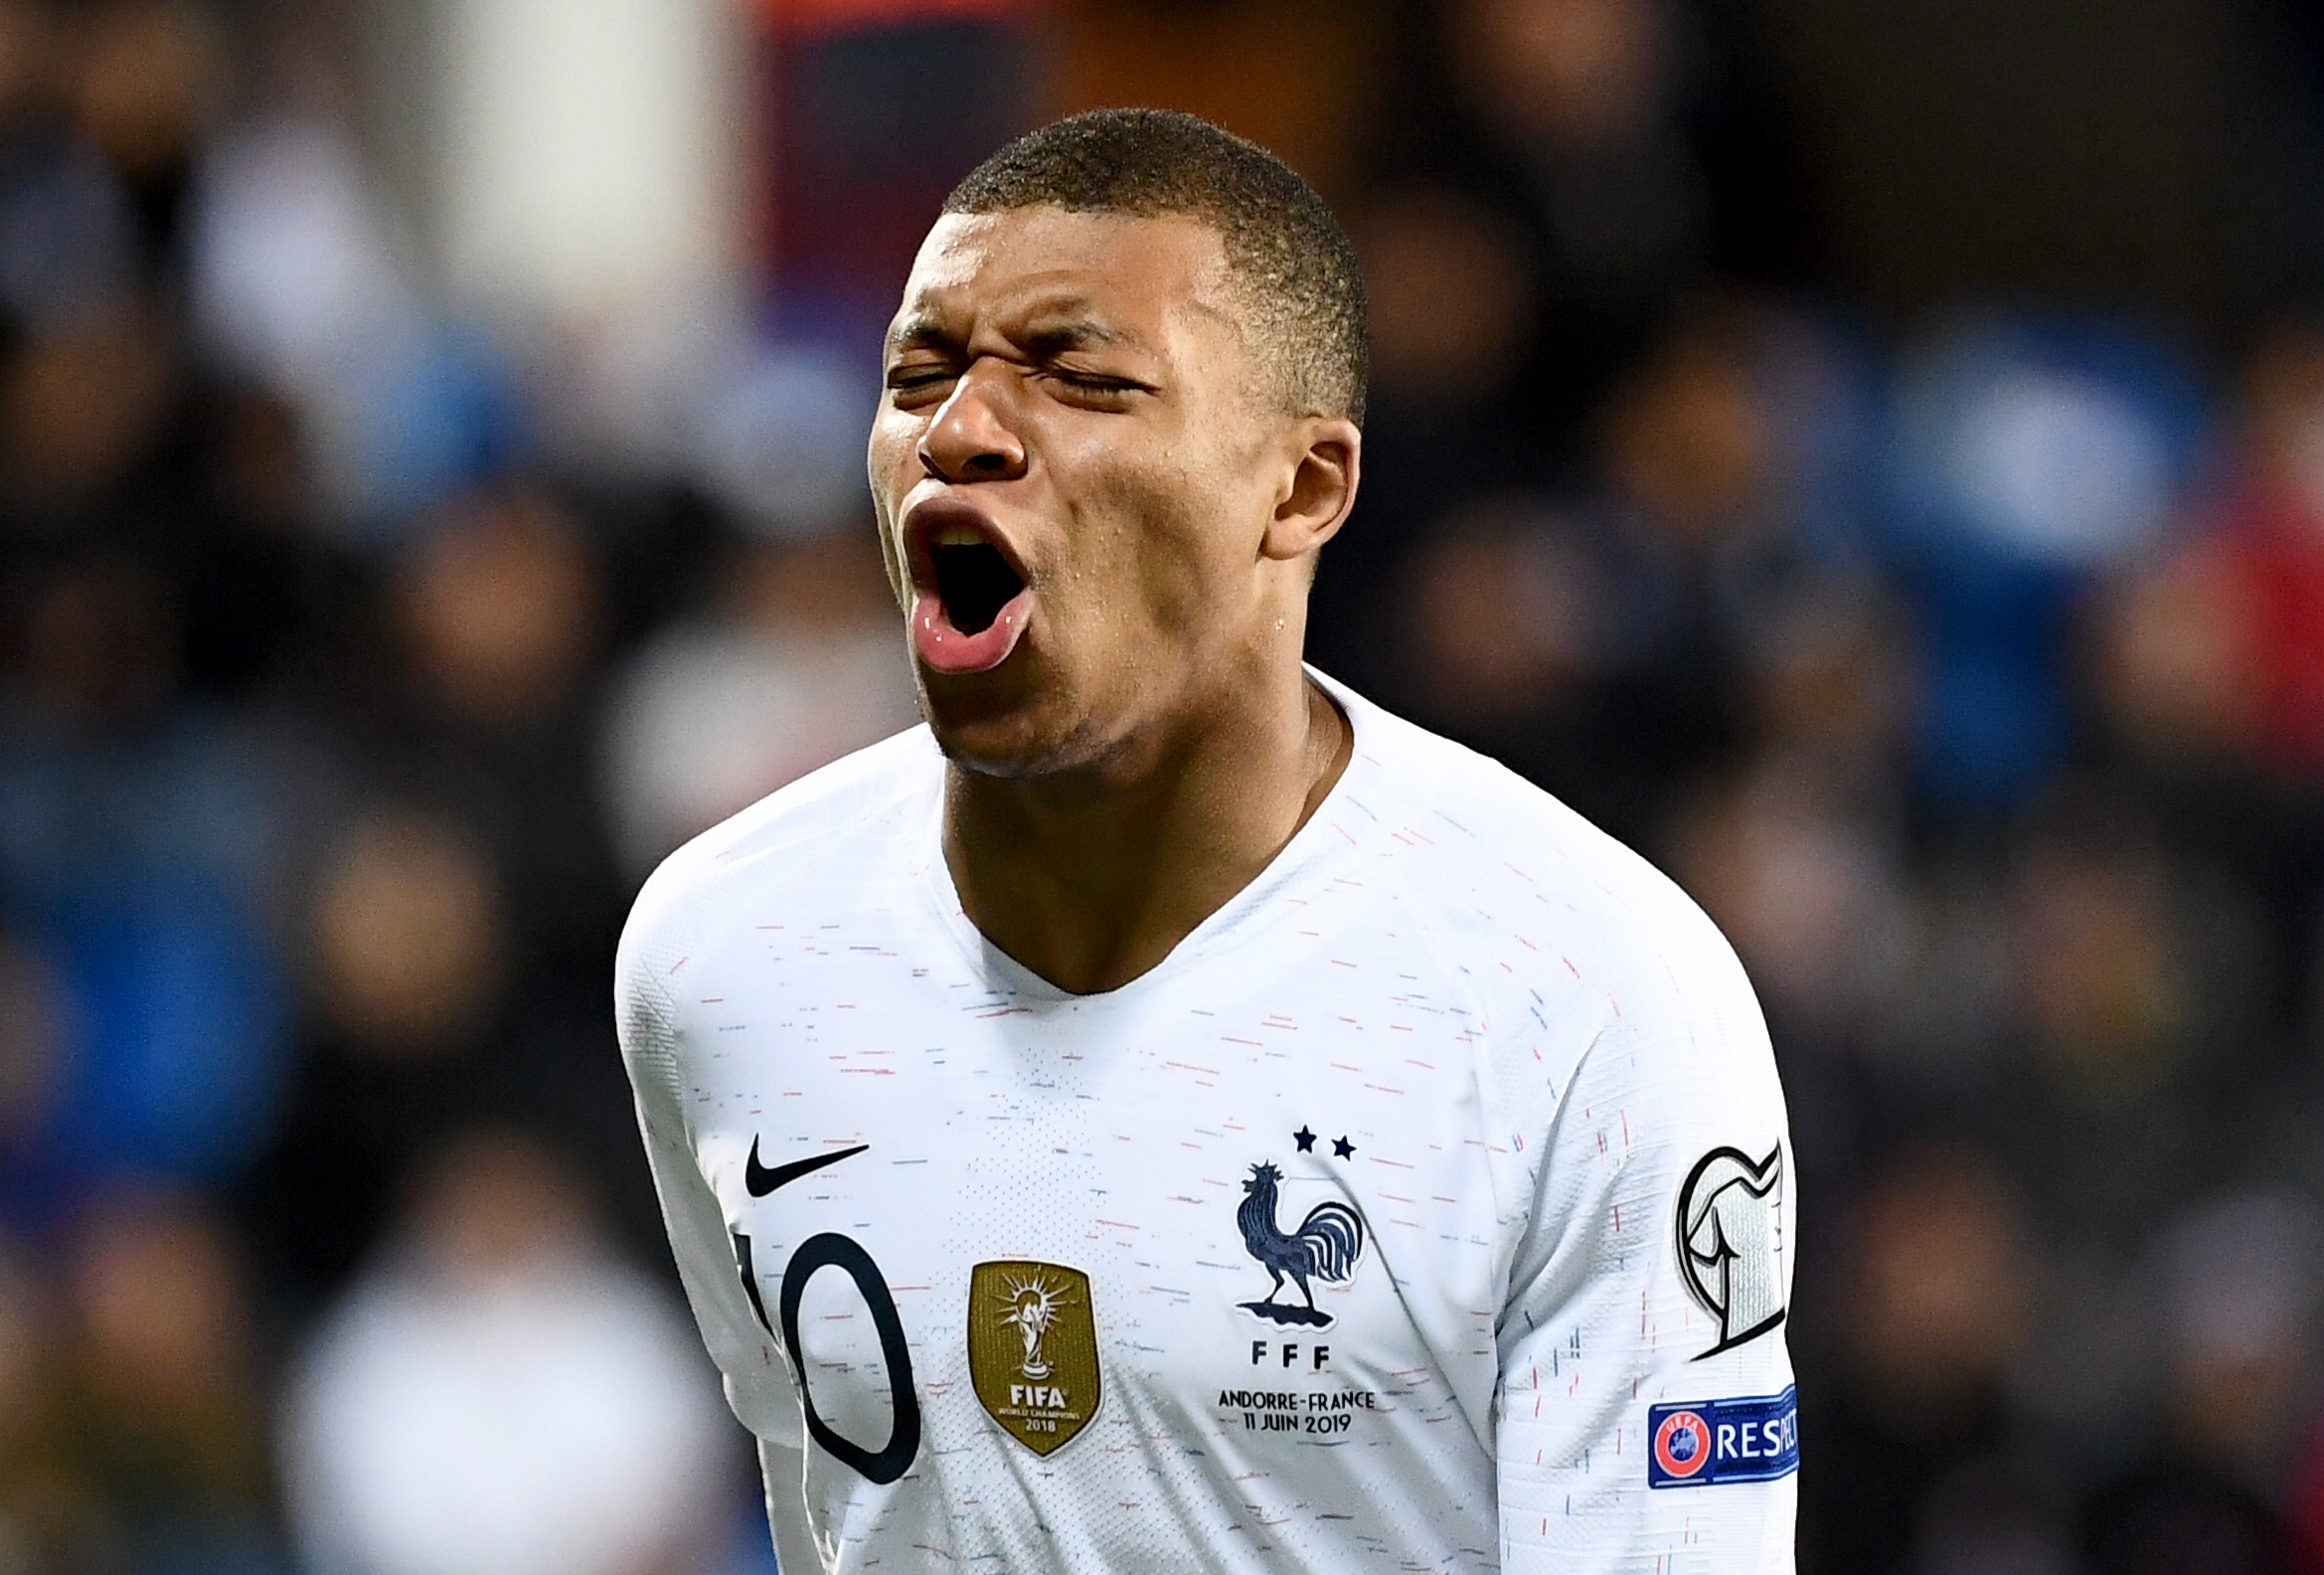 Will Mbappe enjoy another memorable World Cup campaign? (Photo by Franck Fife/AFP/Getty Images)